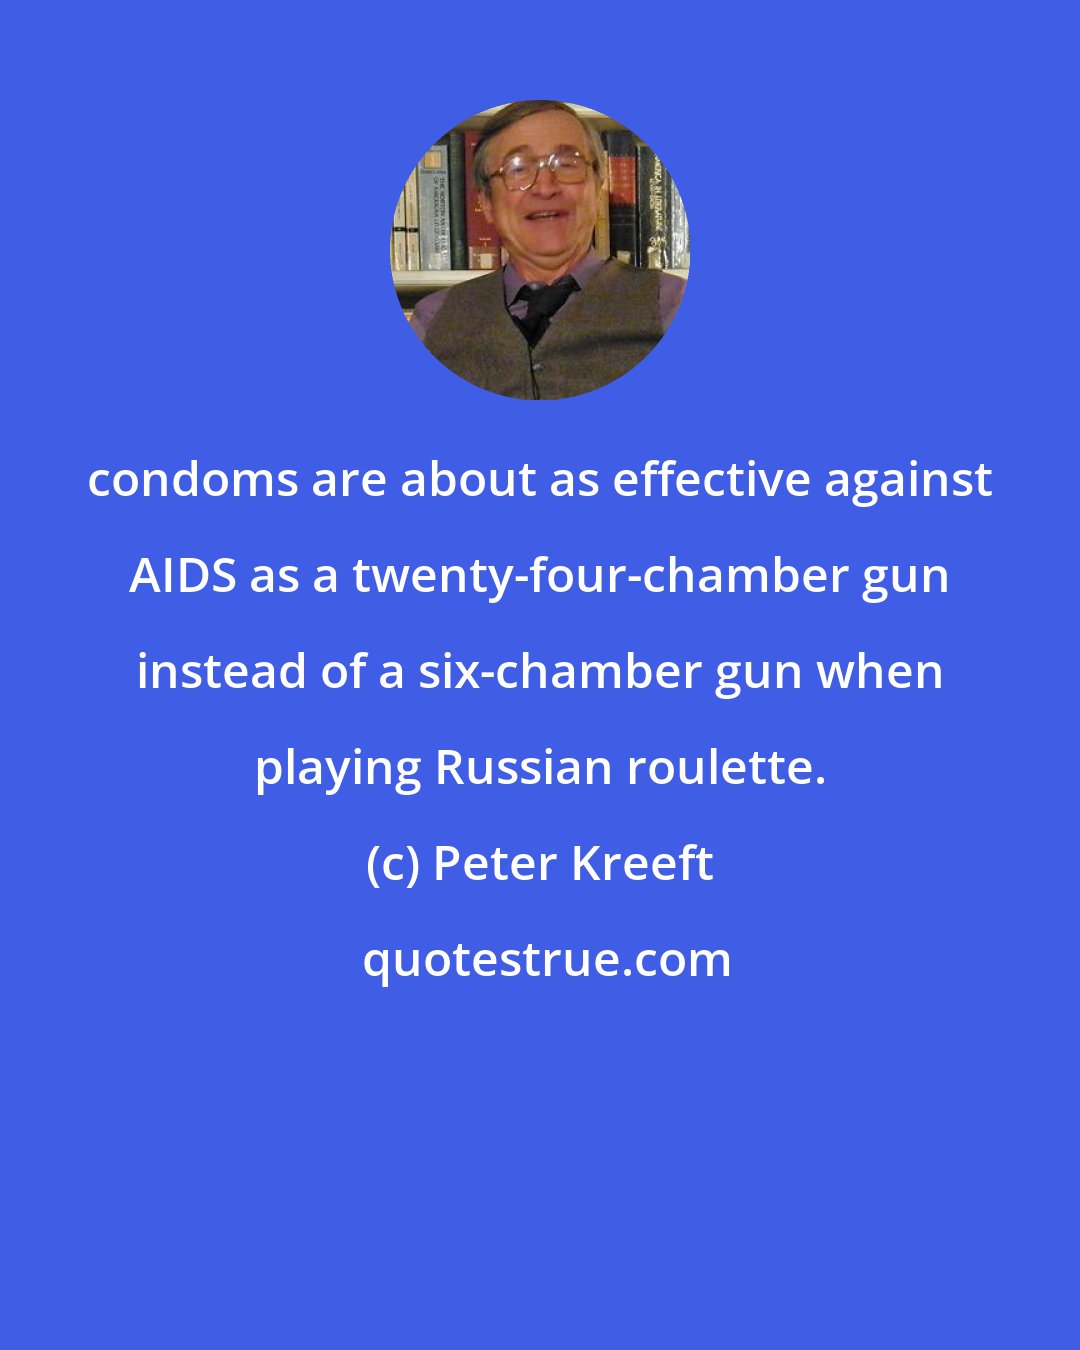 Peter Kreeft: condoms are about as effective against AIDS as a twenty-four-chamber gun instead of a six-chamber gun when playing Russian roulette.